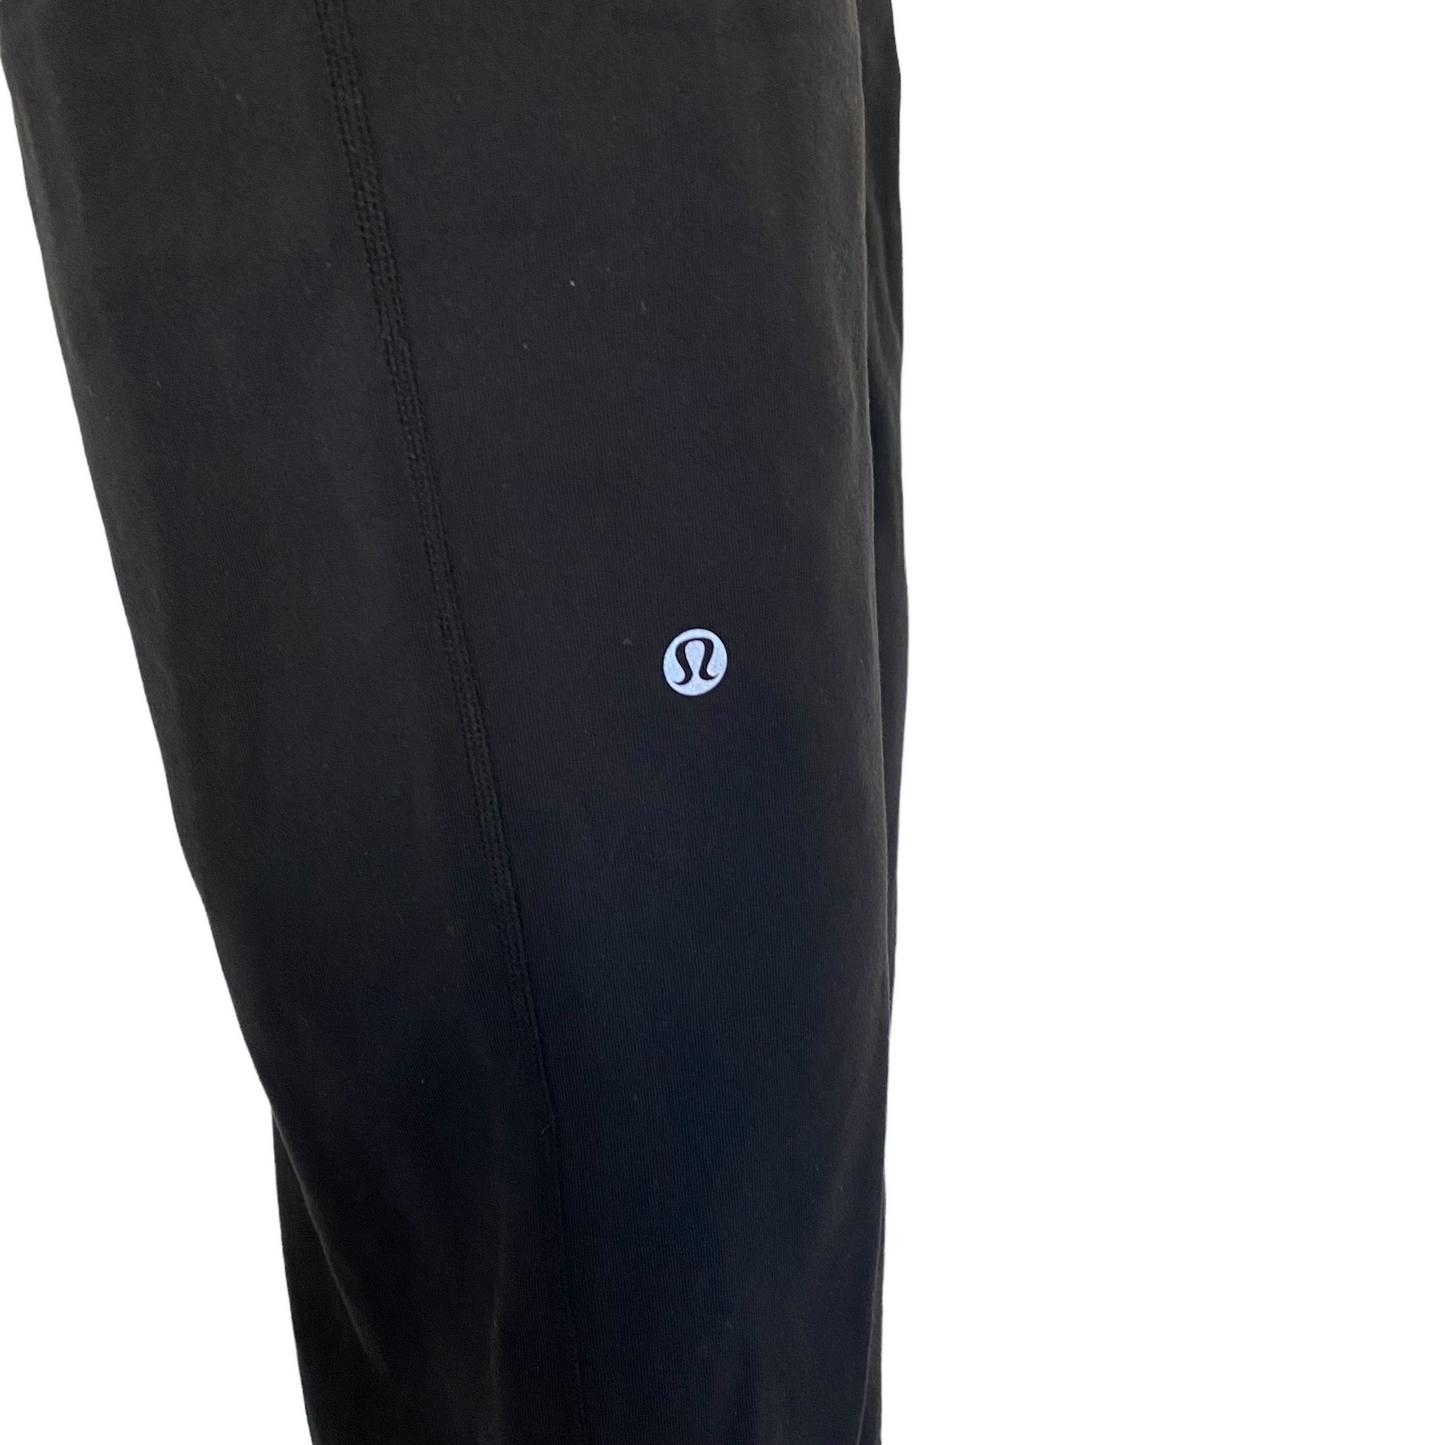 Rare Lululemon Relaxed Fit Pant Size 8